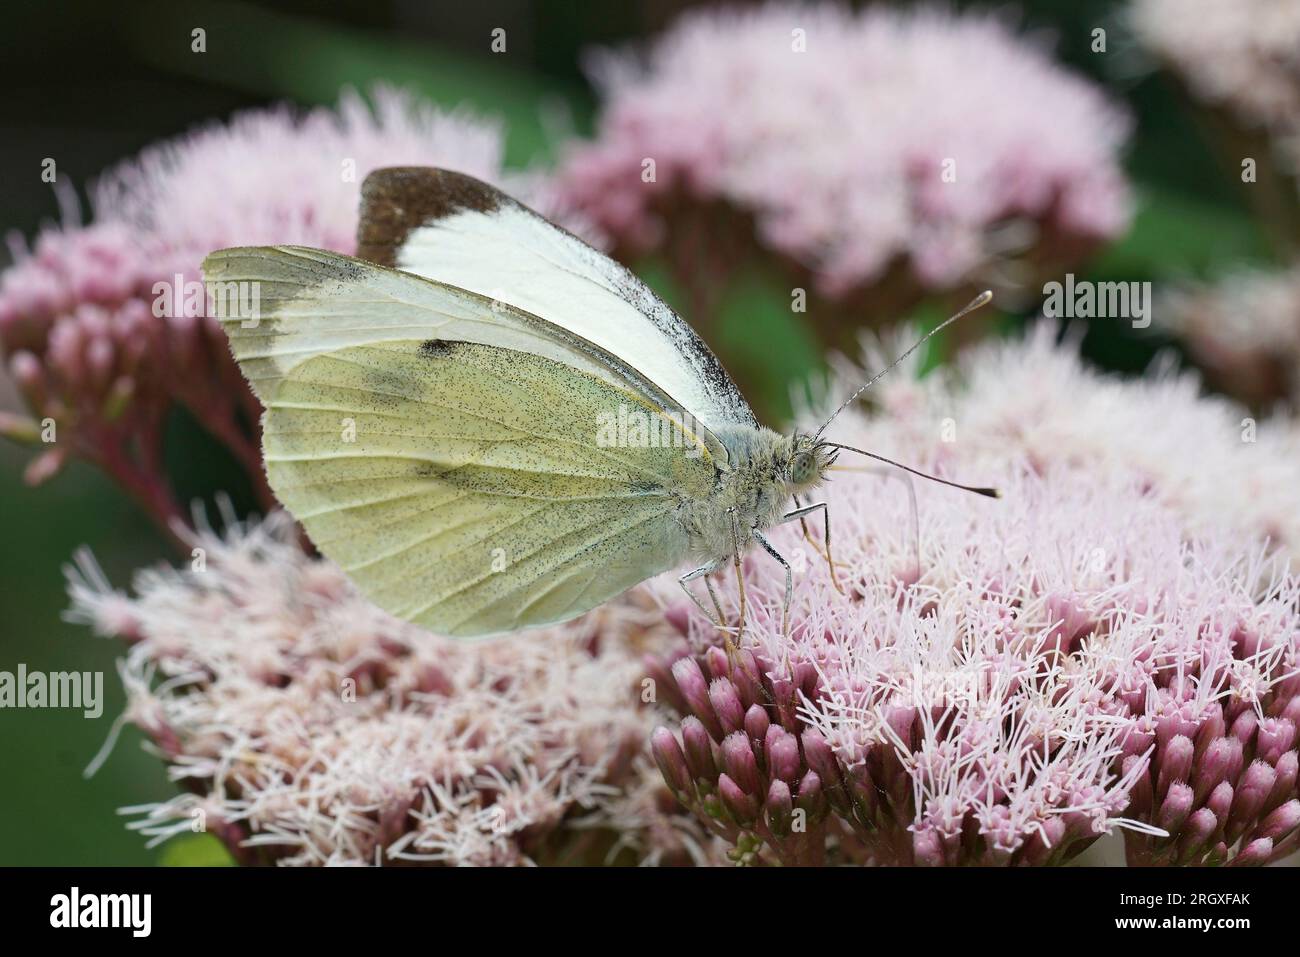 Natural closeup on the large white butterfly, Pieris brassicae sitting on a pink Hemp agrymony flower Stock Photo